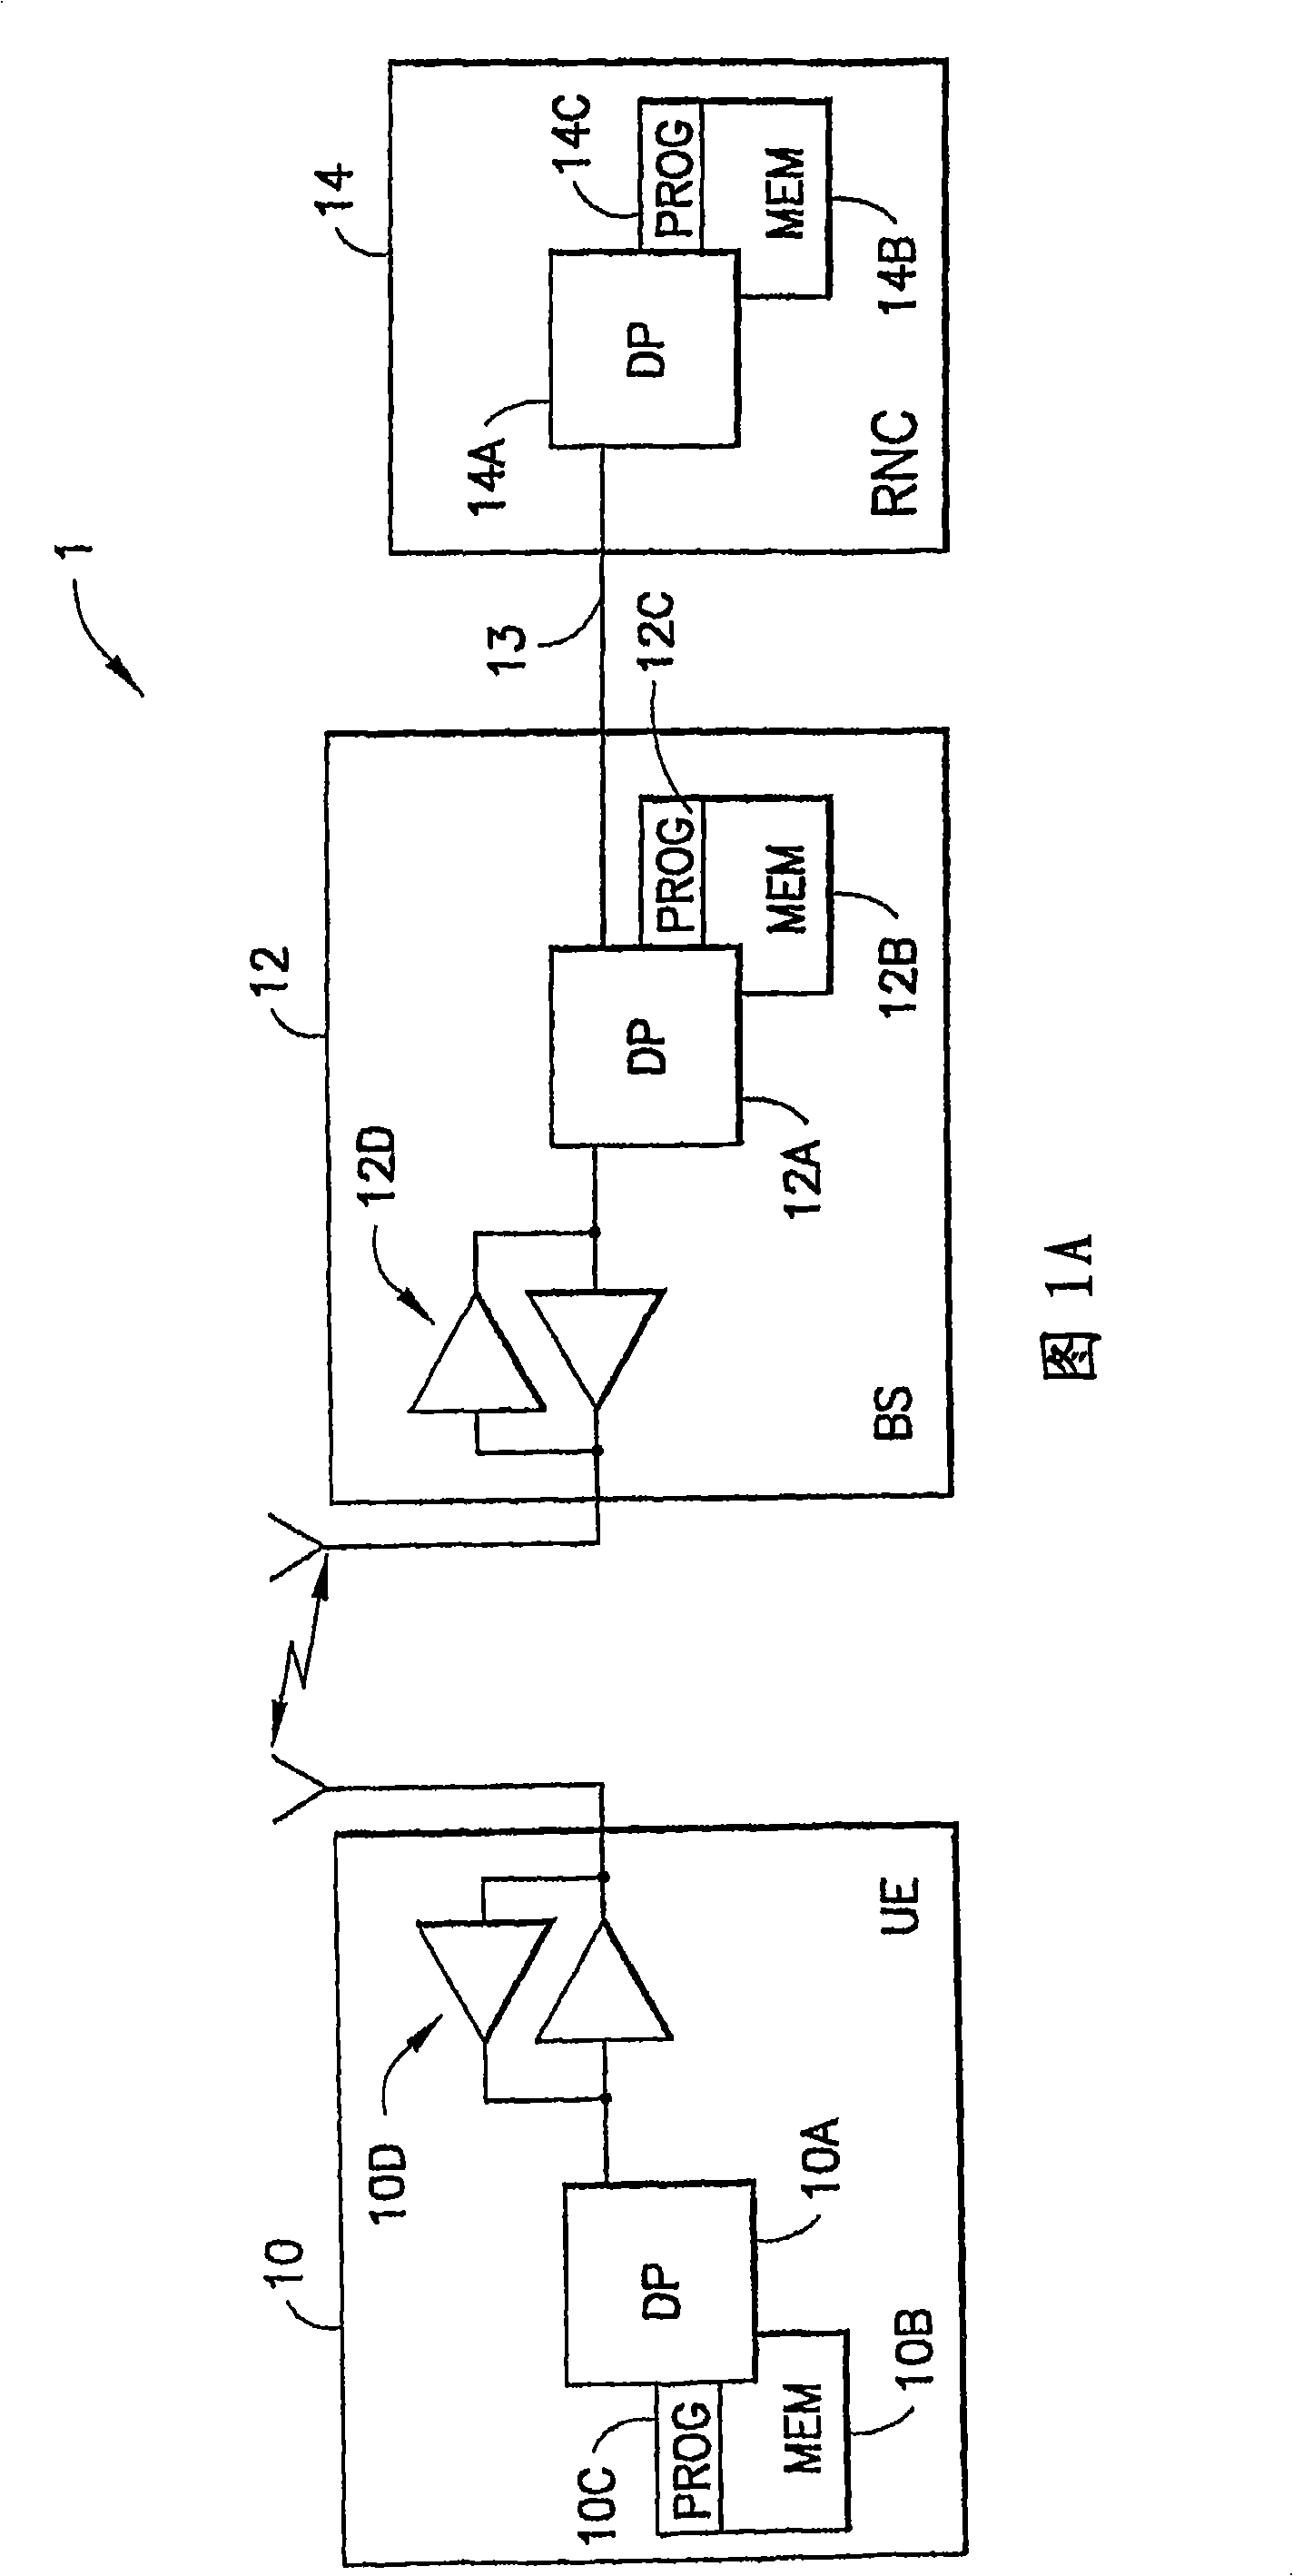 Apparatus, method and computer program product to configure a radio link protocol for internet protocol flow